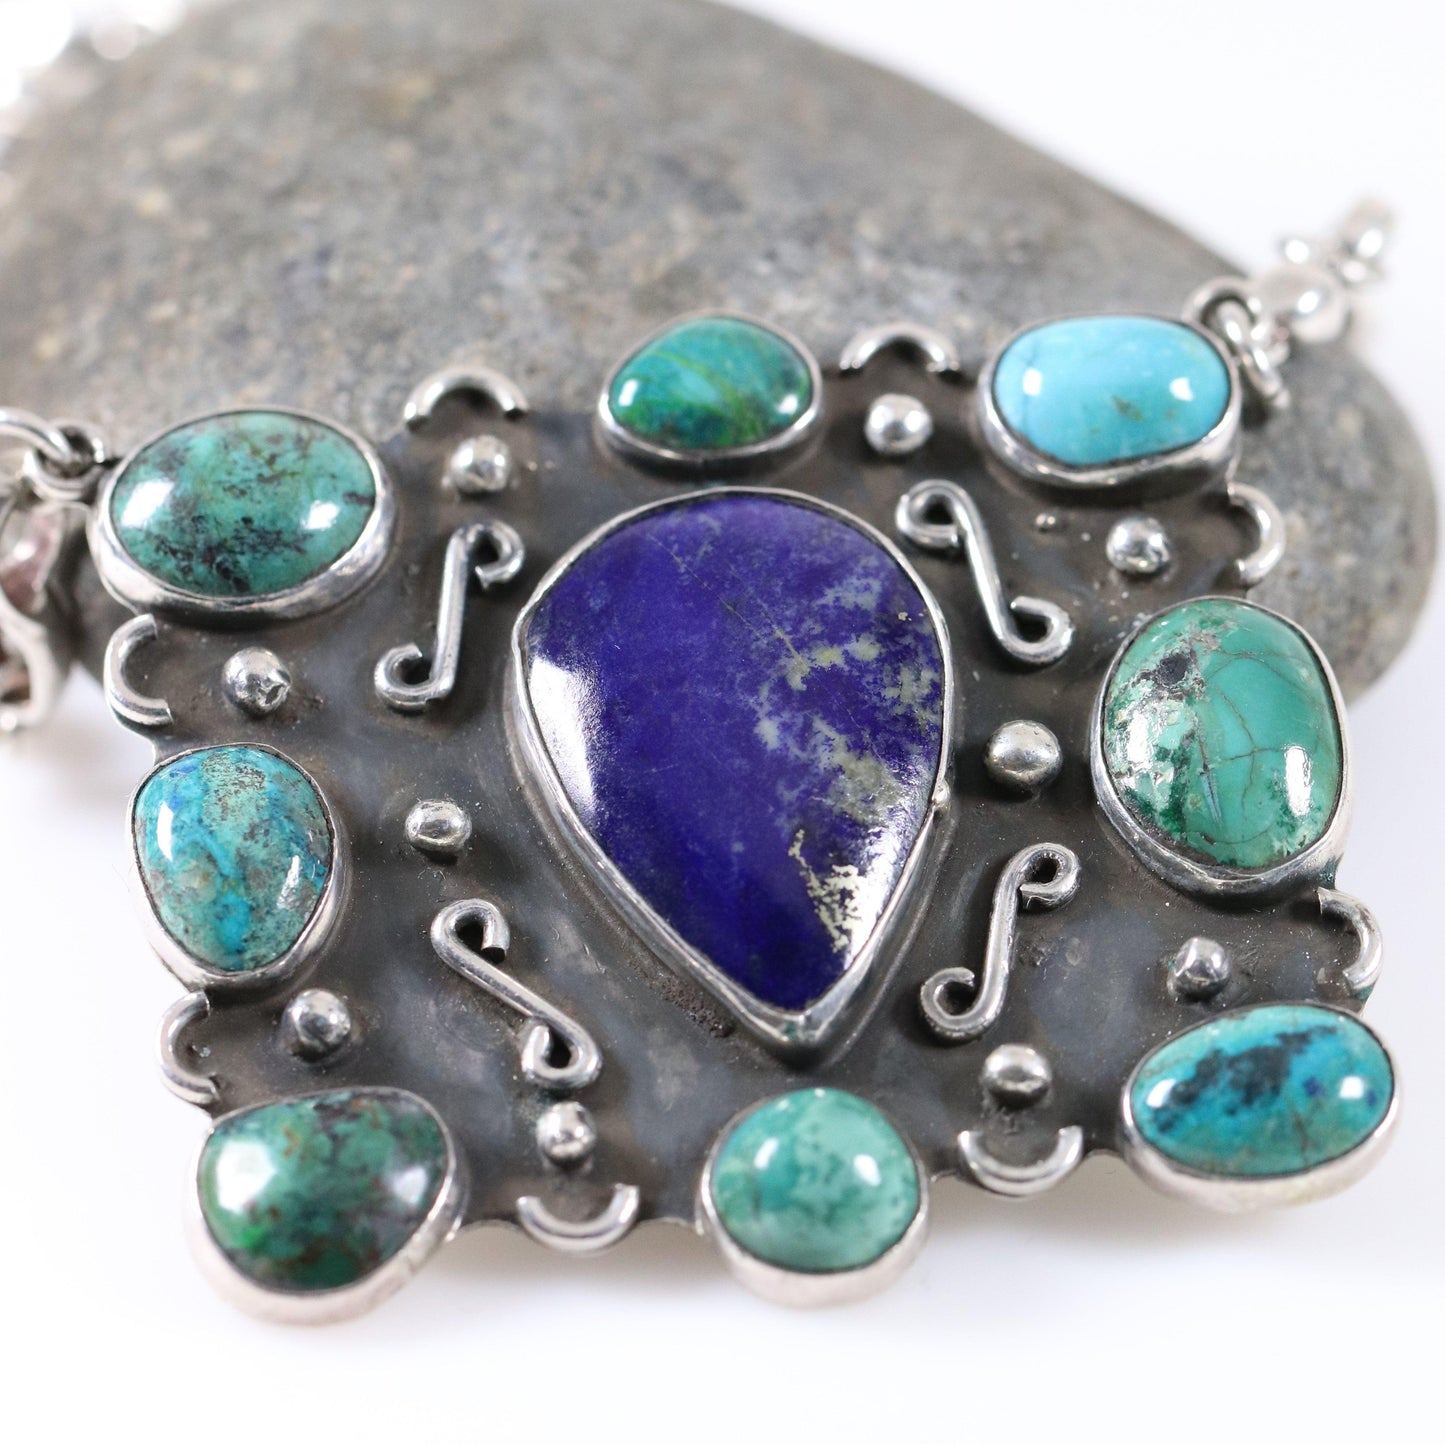 Vintage Handcrafted Silver Jewelry | Artisan Turquoise and Lapis Statement Necklace - Carmel Fine Silver Jewelry